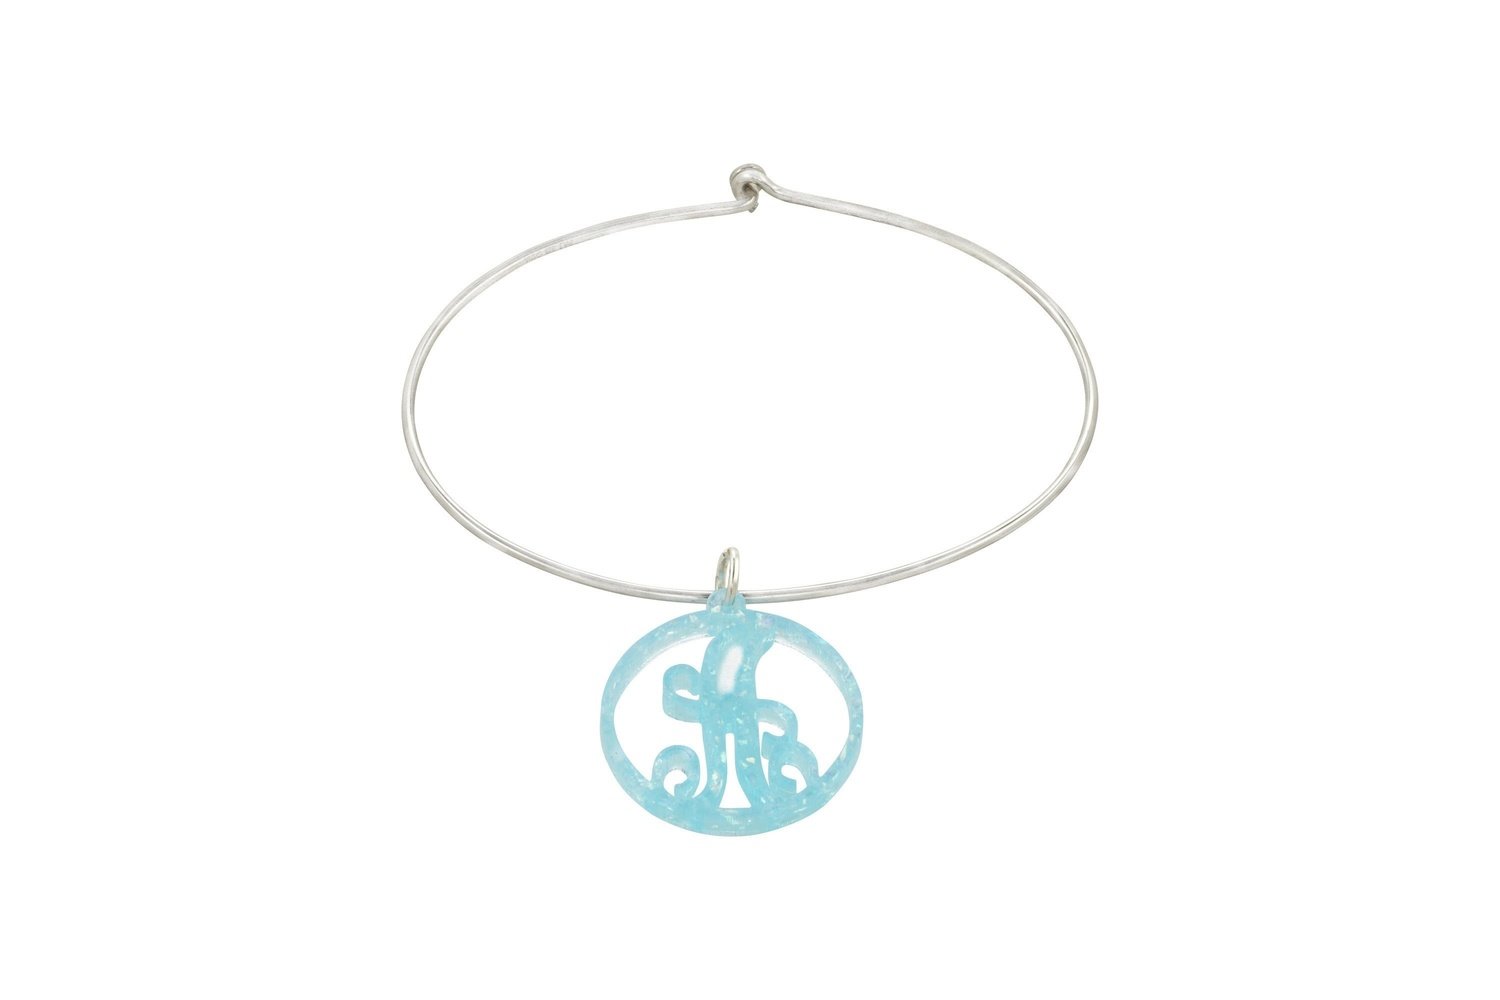 Scroll Initial with Sterling Silver Bangle Bracelet